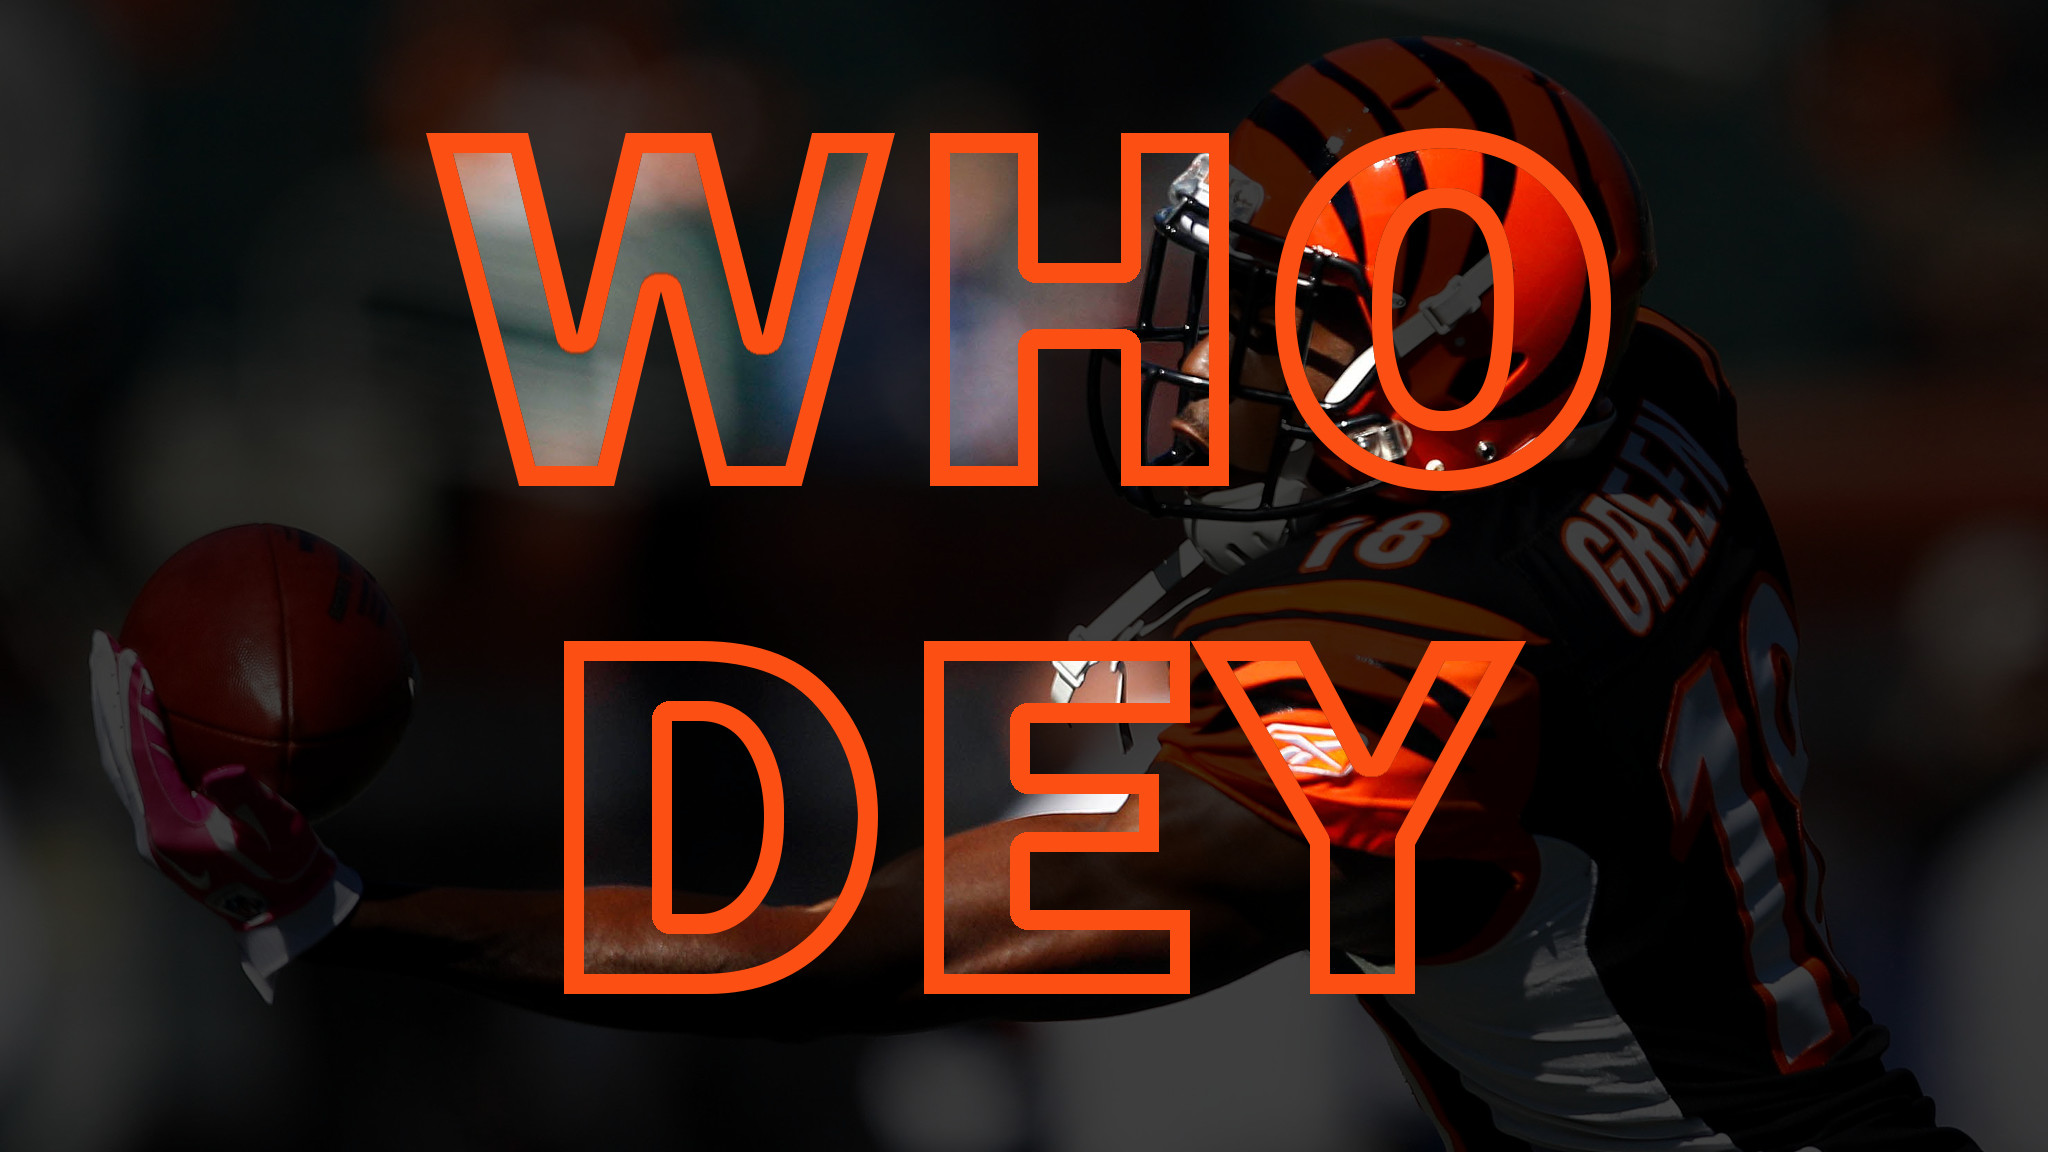 2048x1152 Hey Bengals, dropping by with a wallpaper. Let me know what you think. Feel  free to leave requests.